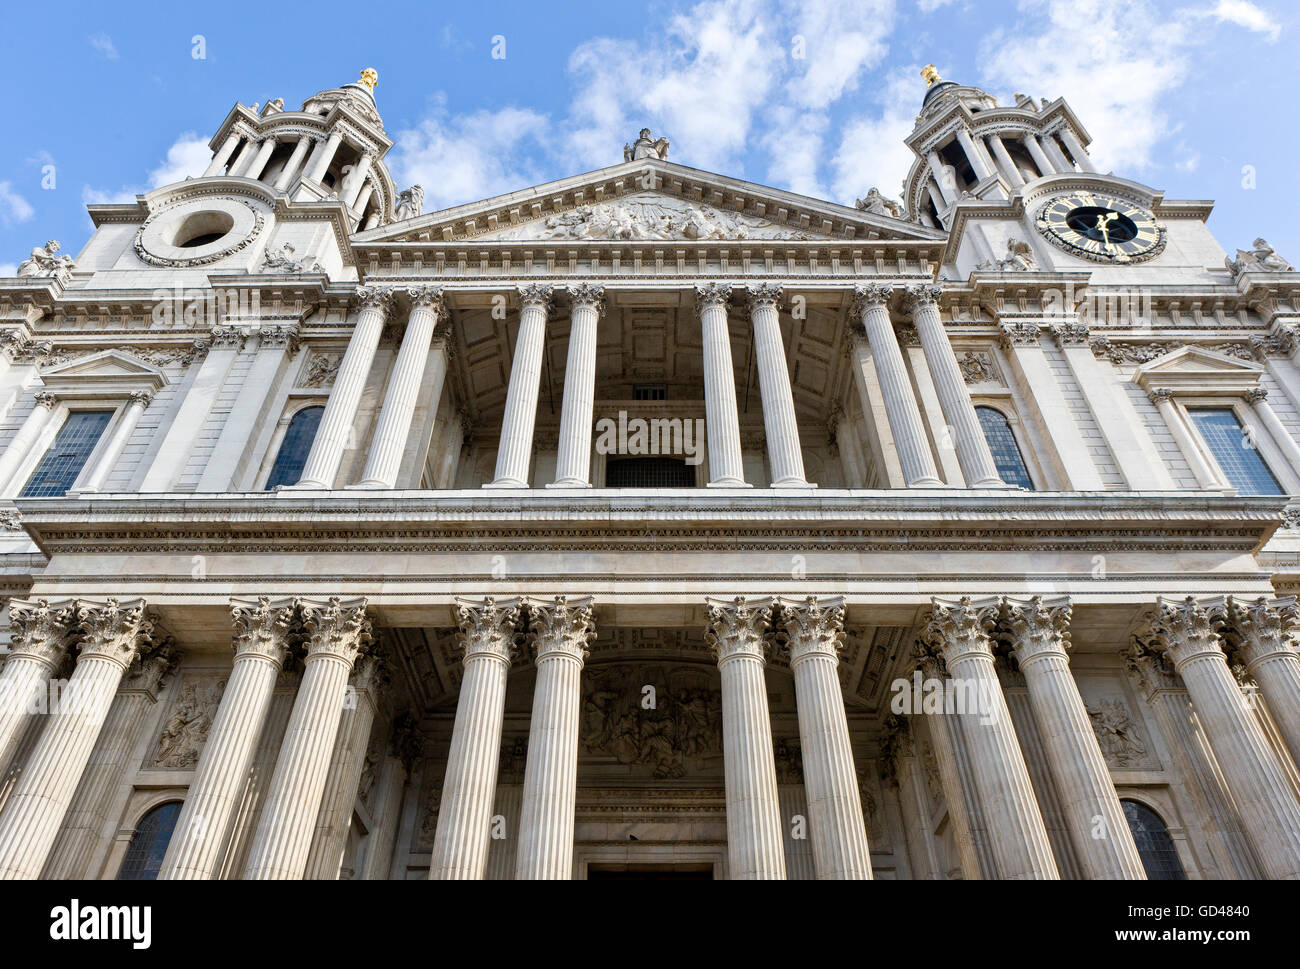 Saint Paul's Cathedral, Londres, Angleterre Banque D'Images